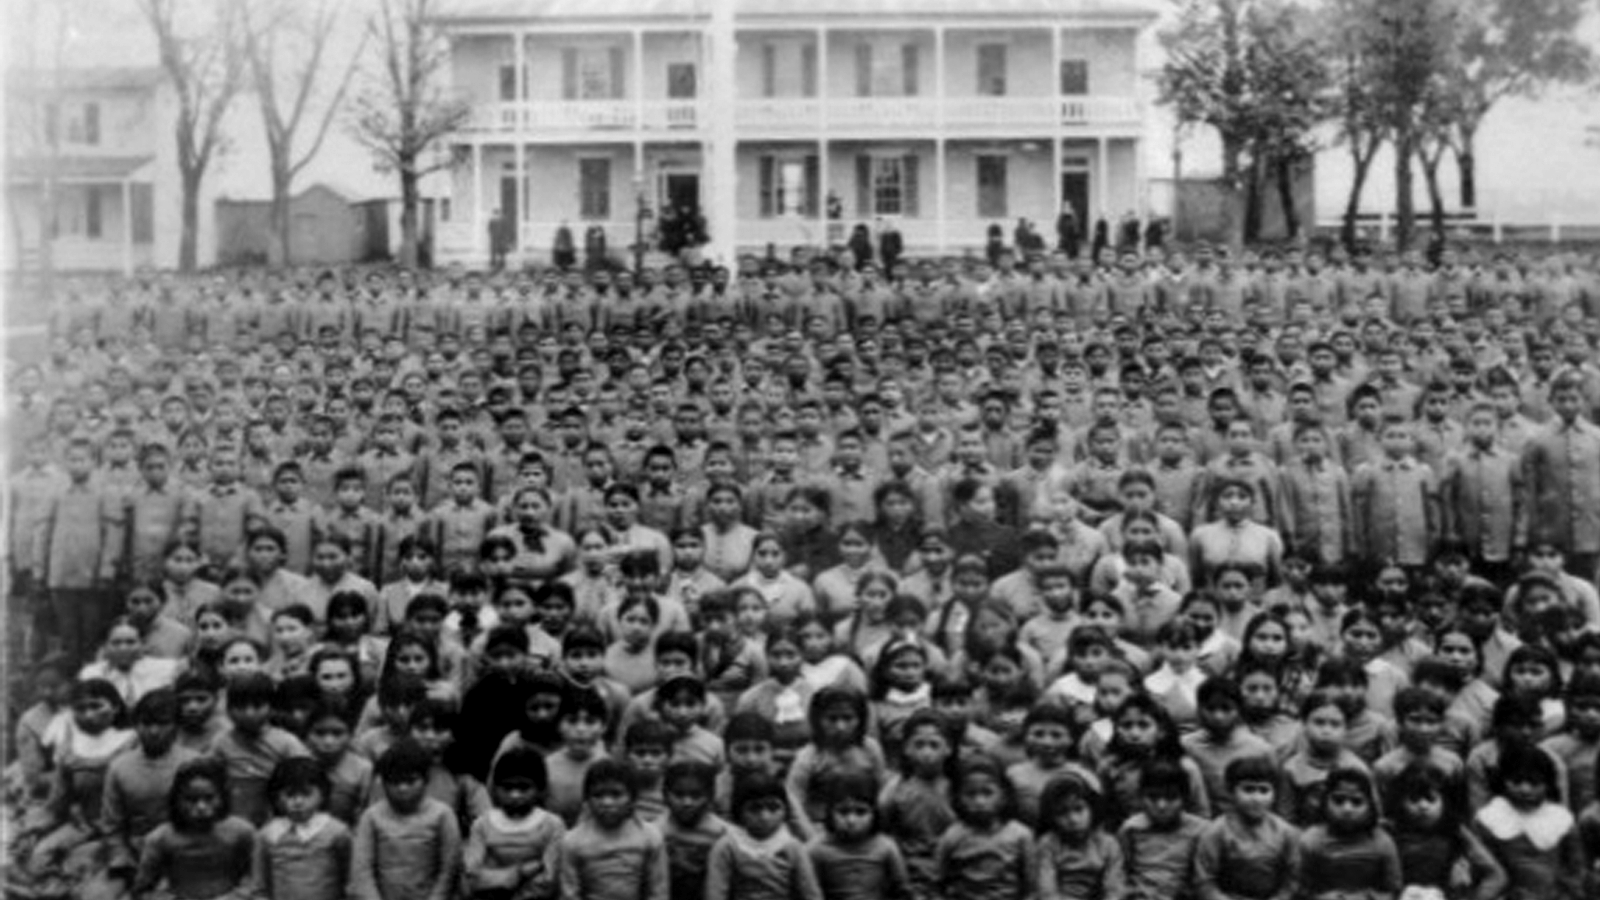 Thousands of students seated in front of a white, two-story school house